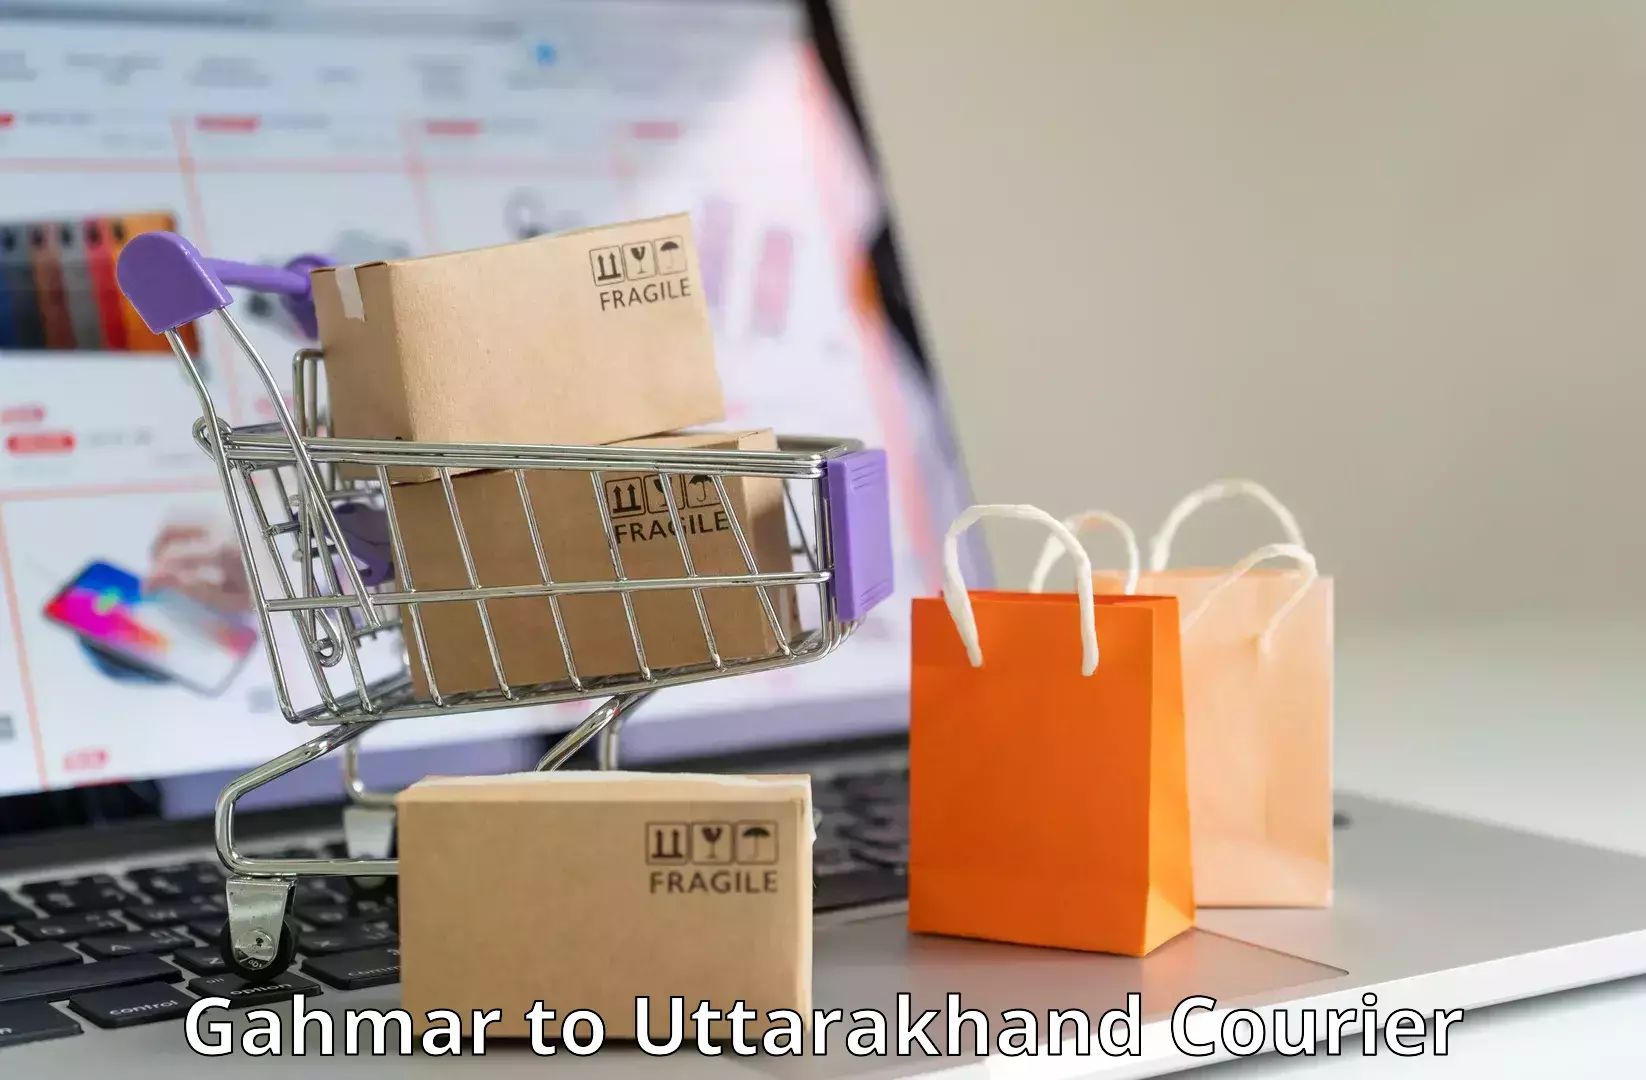 On-time delivery services Gahmar to Uttarakhand